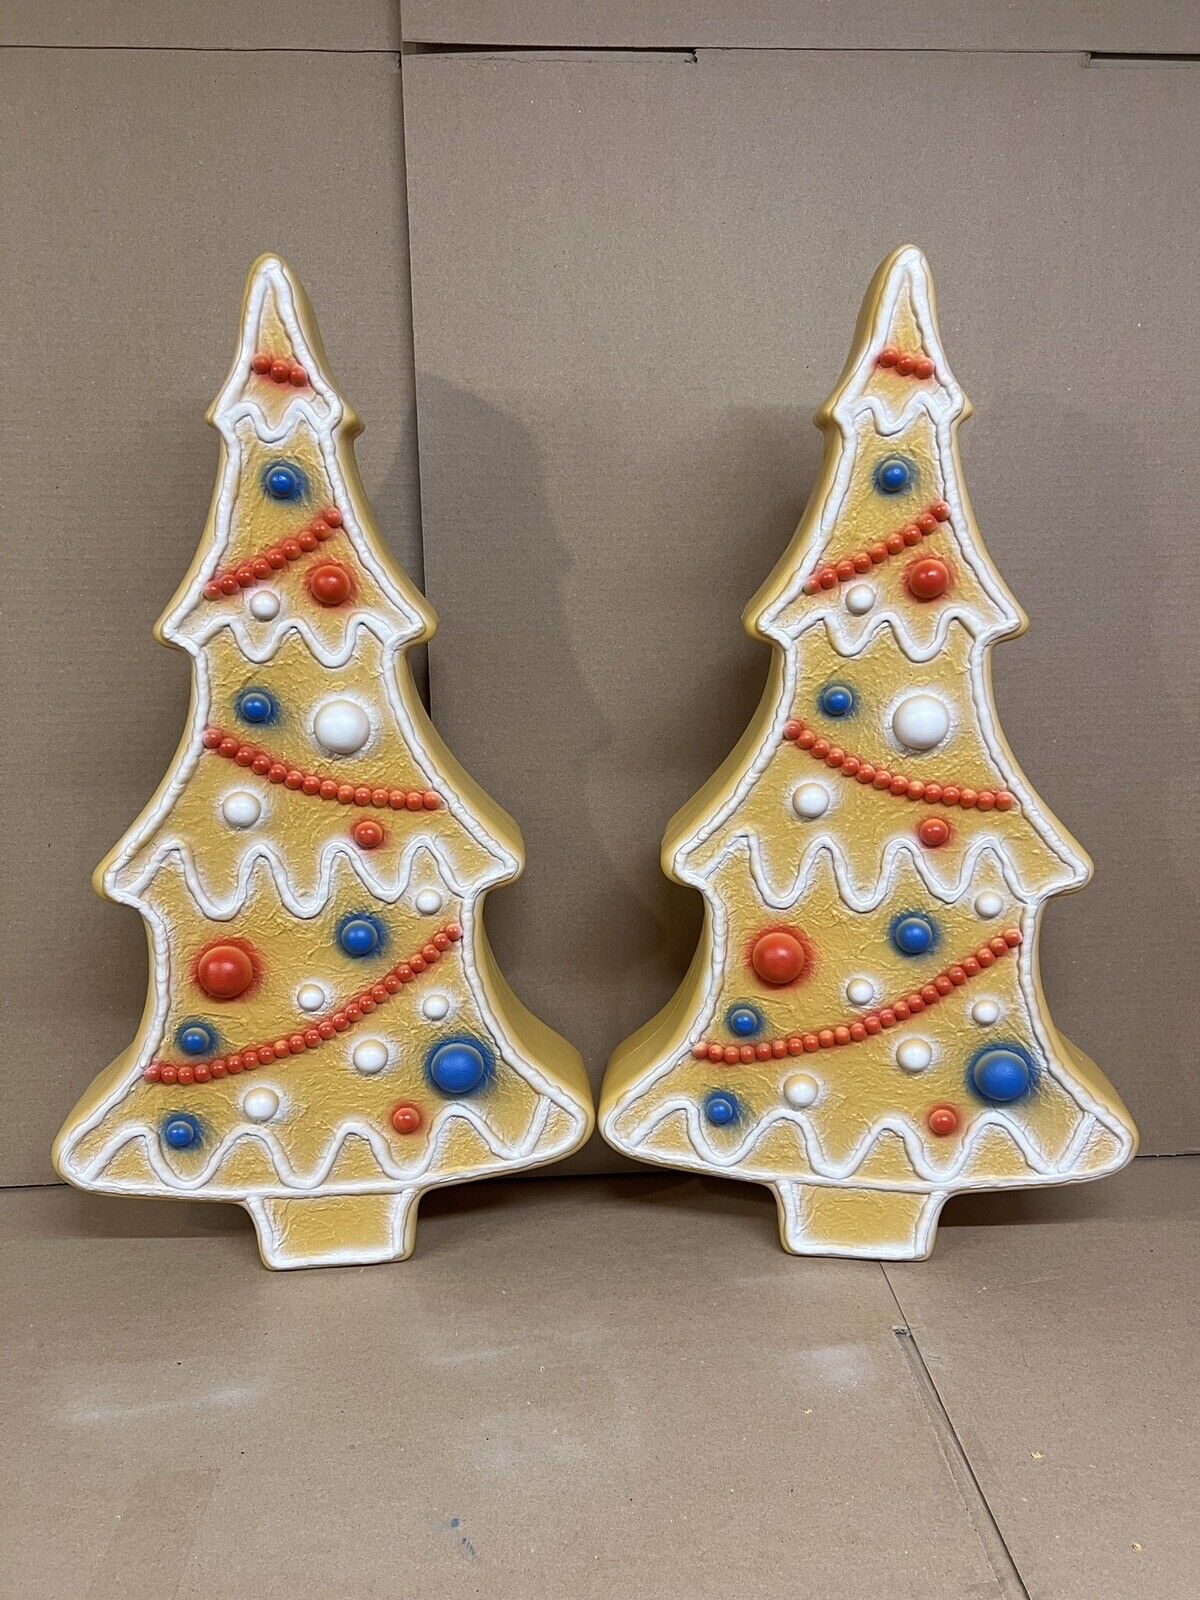 Blow Mold Gingerbread Trees Patriotic Colors Red White Blue July 4 Union